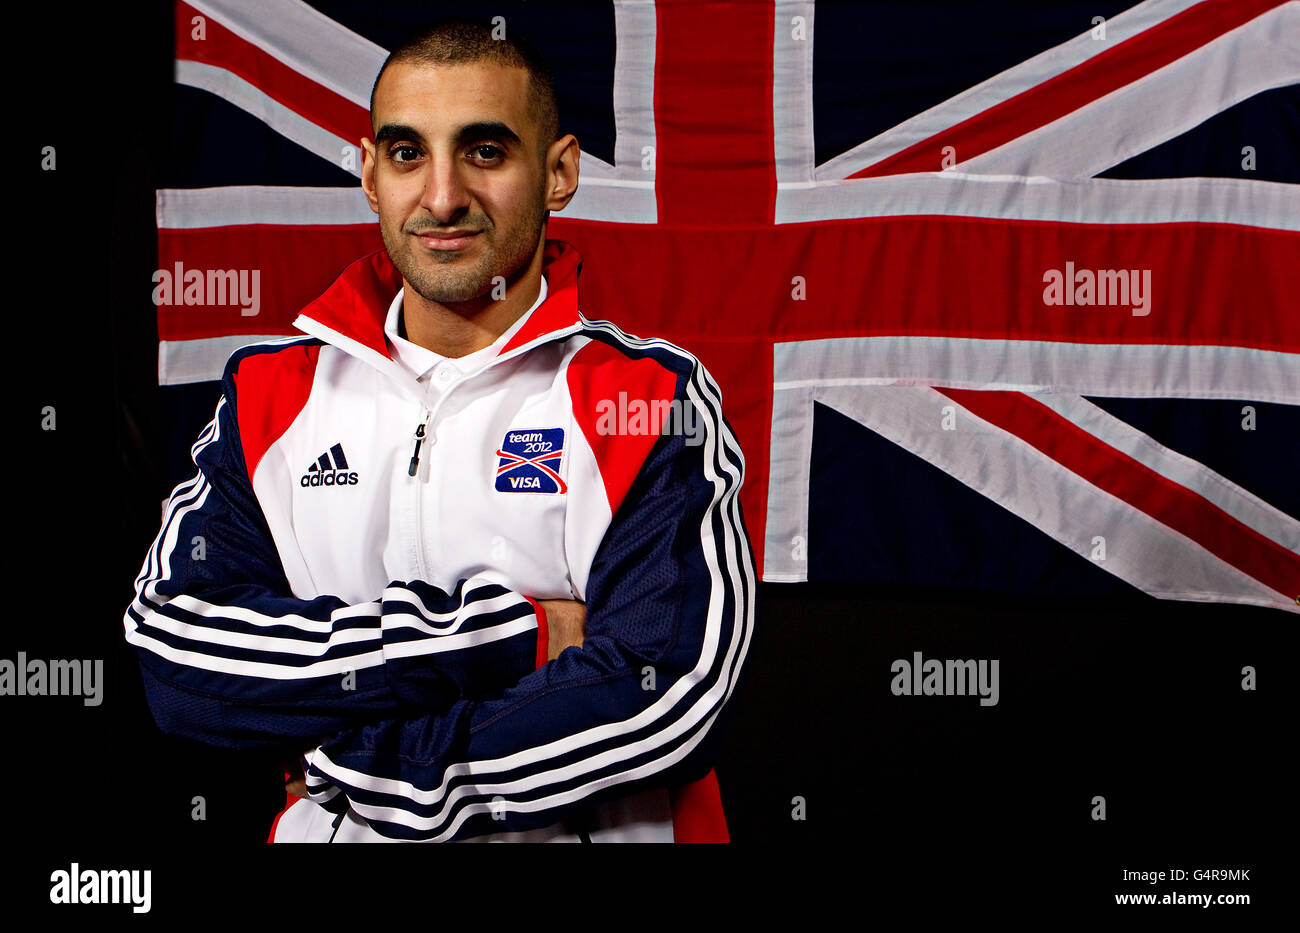 Great Britain weightlifter Ali Jawad during the photocall at the Velodrome in the Olympic Park, London. Over 30 London 2012 hopefuls came together to prepare for the Games. Team 2012, presented by Visa, is raising funds for 1,200 British athletes at www.team-2012.com. Stock Photo